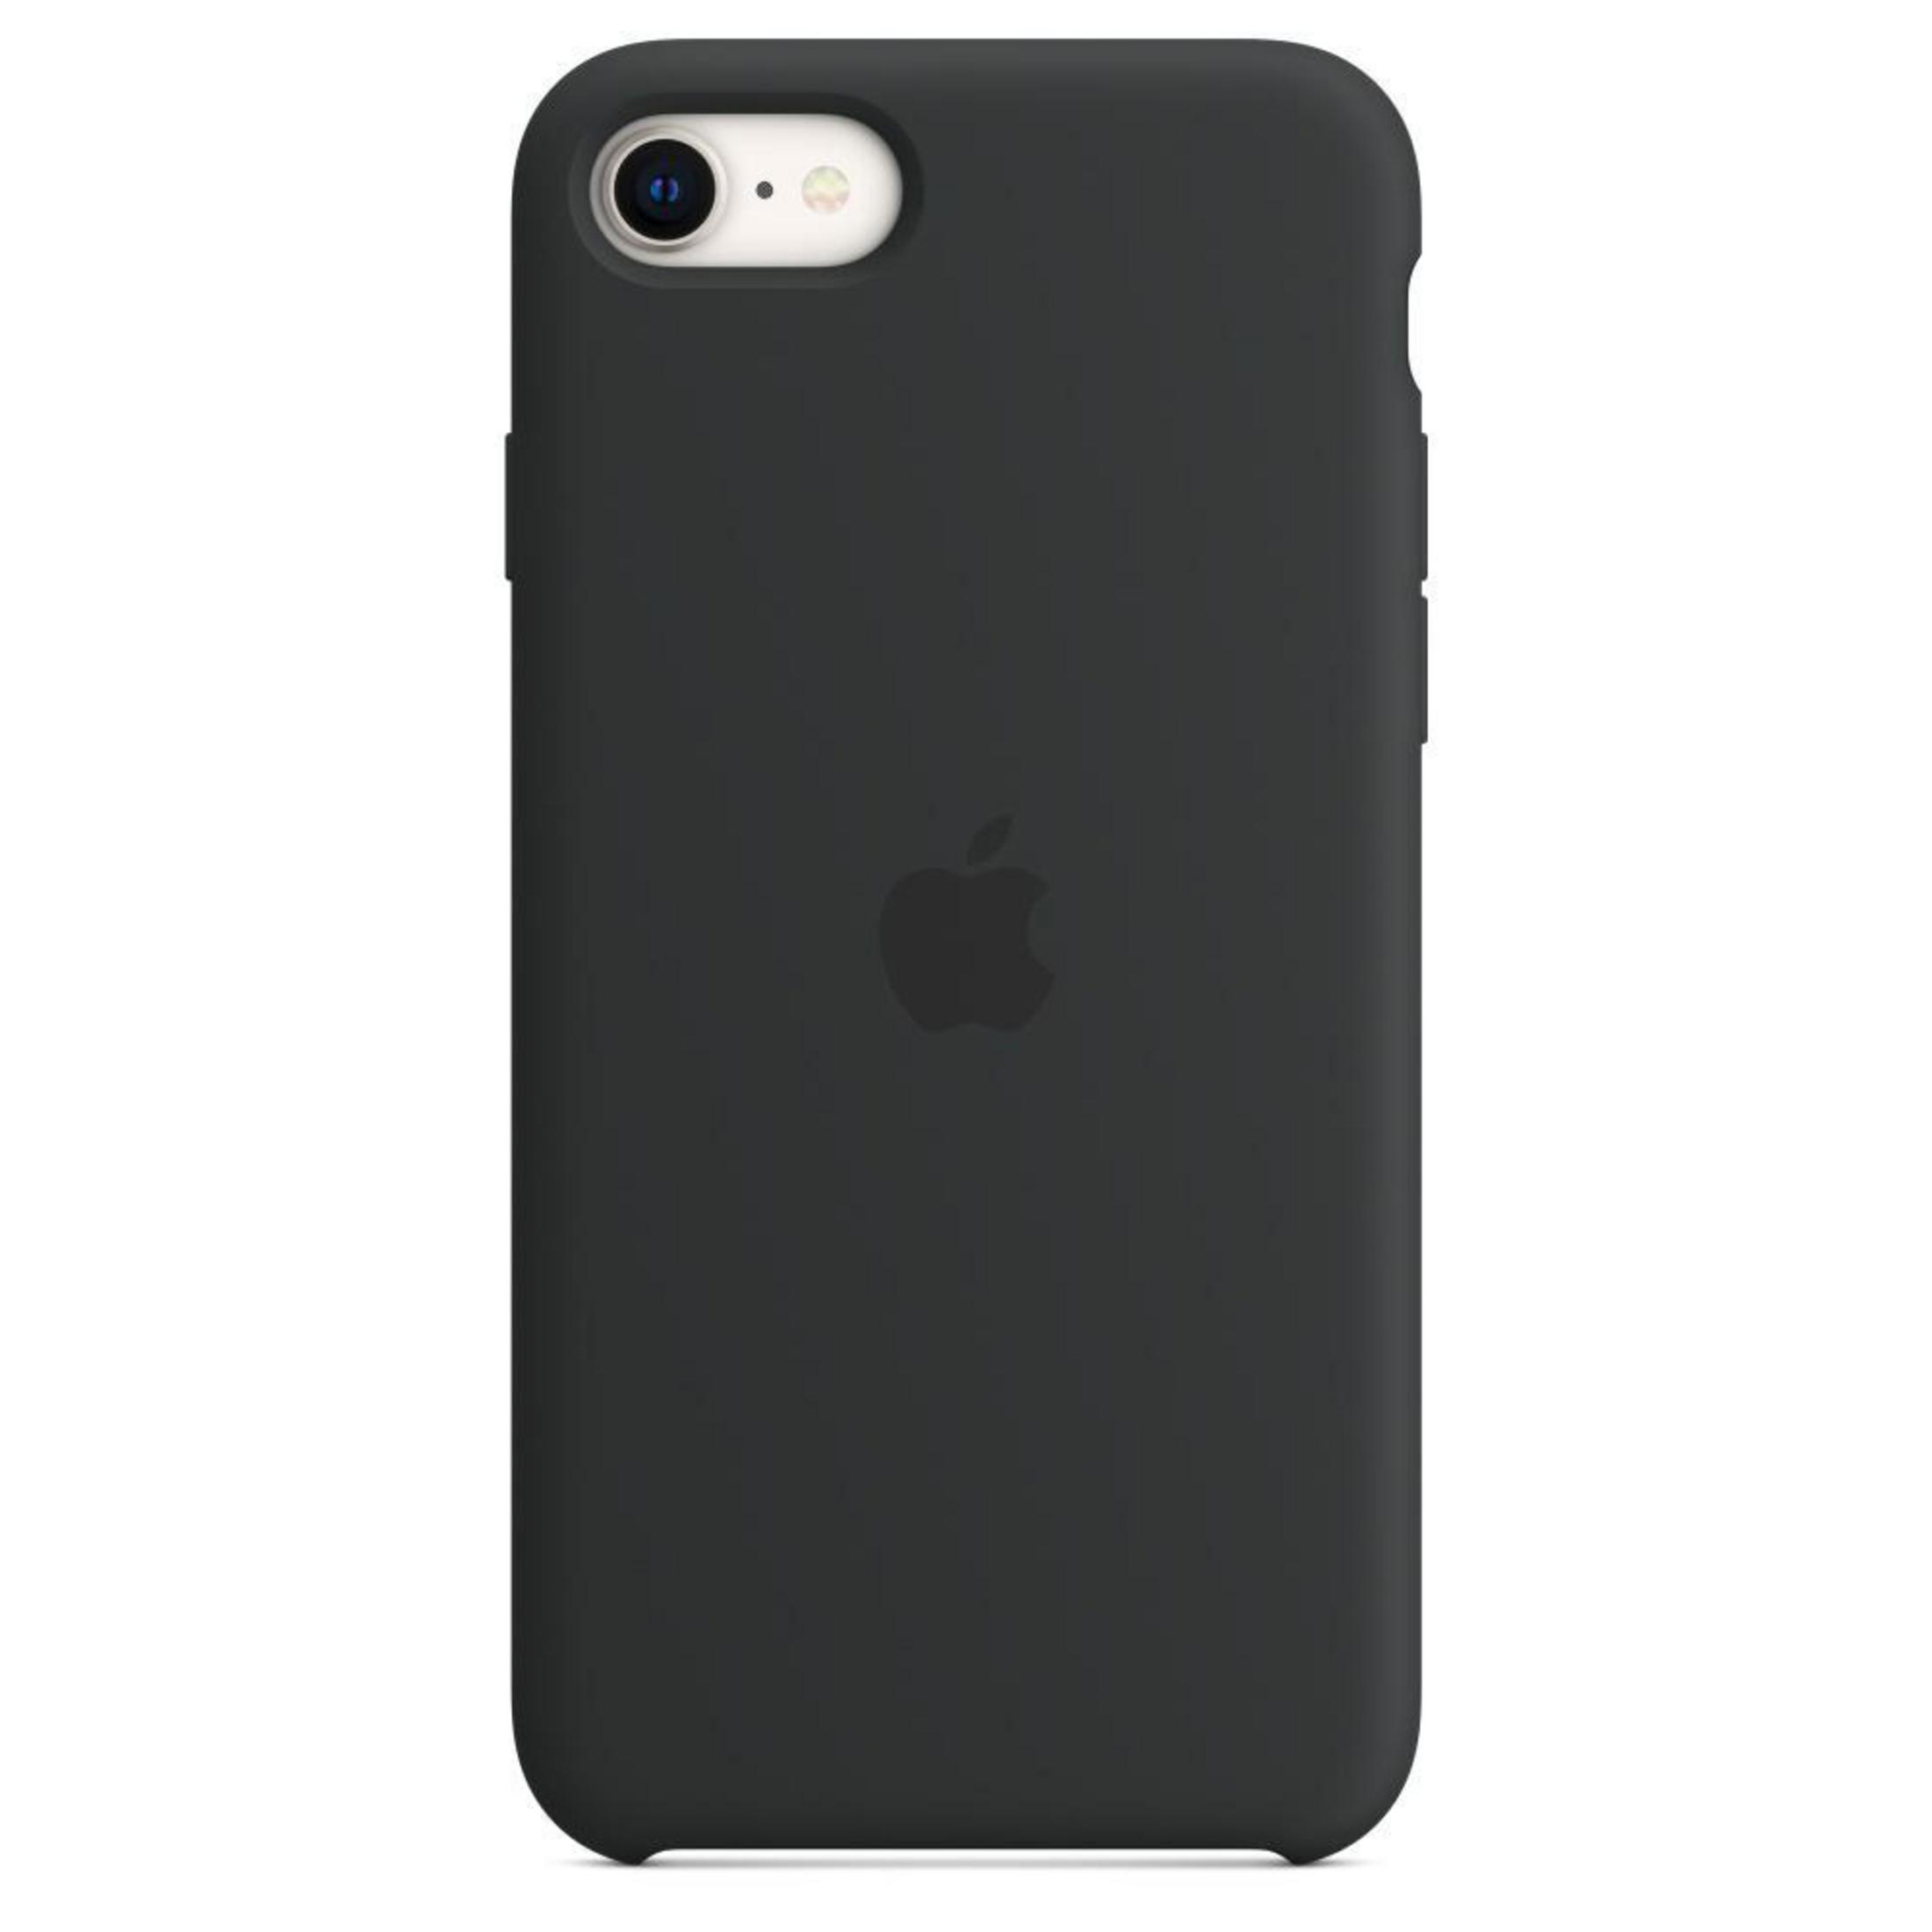 SILICONE Mitternacht Backcover, SE (2. C. 8, (3. iPhone APPLE iPhone SE MIDNIGHT, IPHONE Generation), Generation), Apple, iPhone 7, MN6E3ZM/A iPhone SE